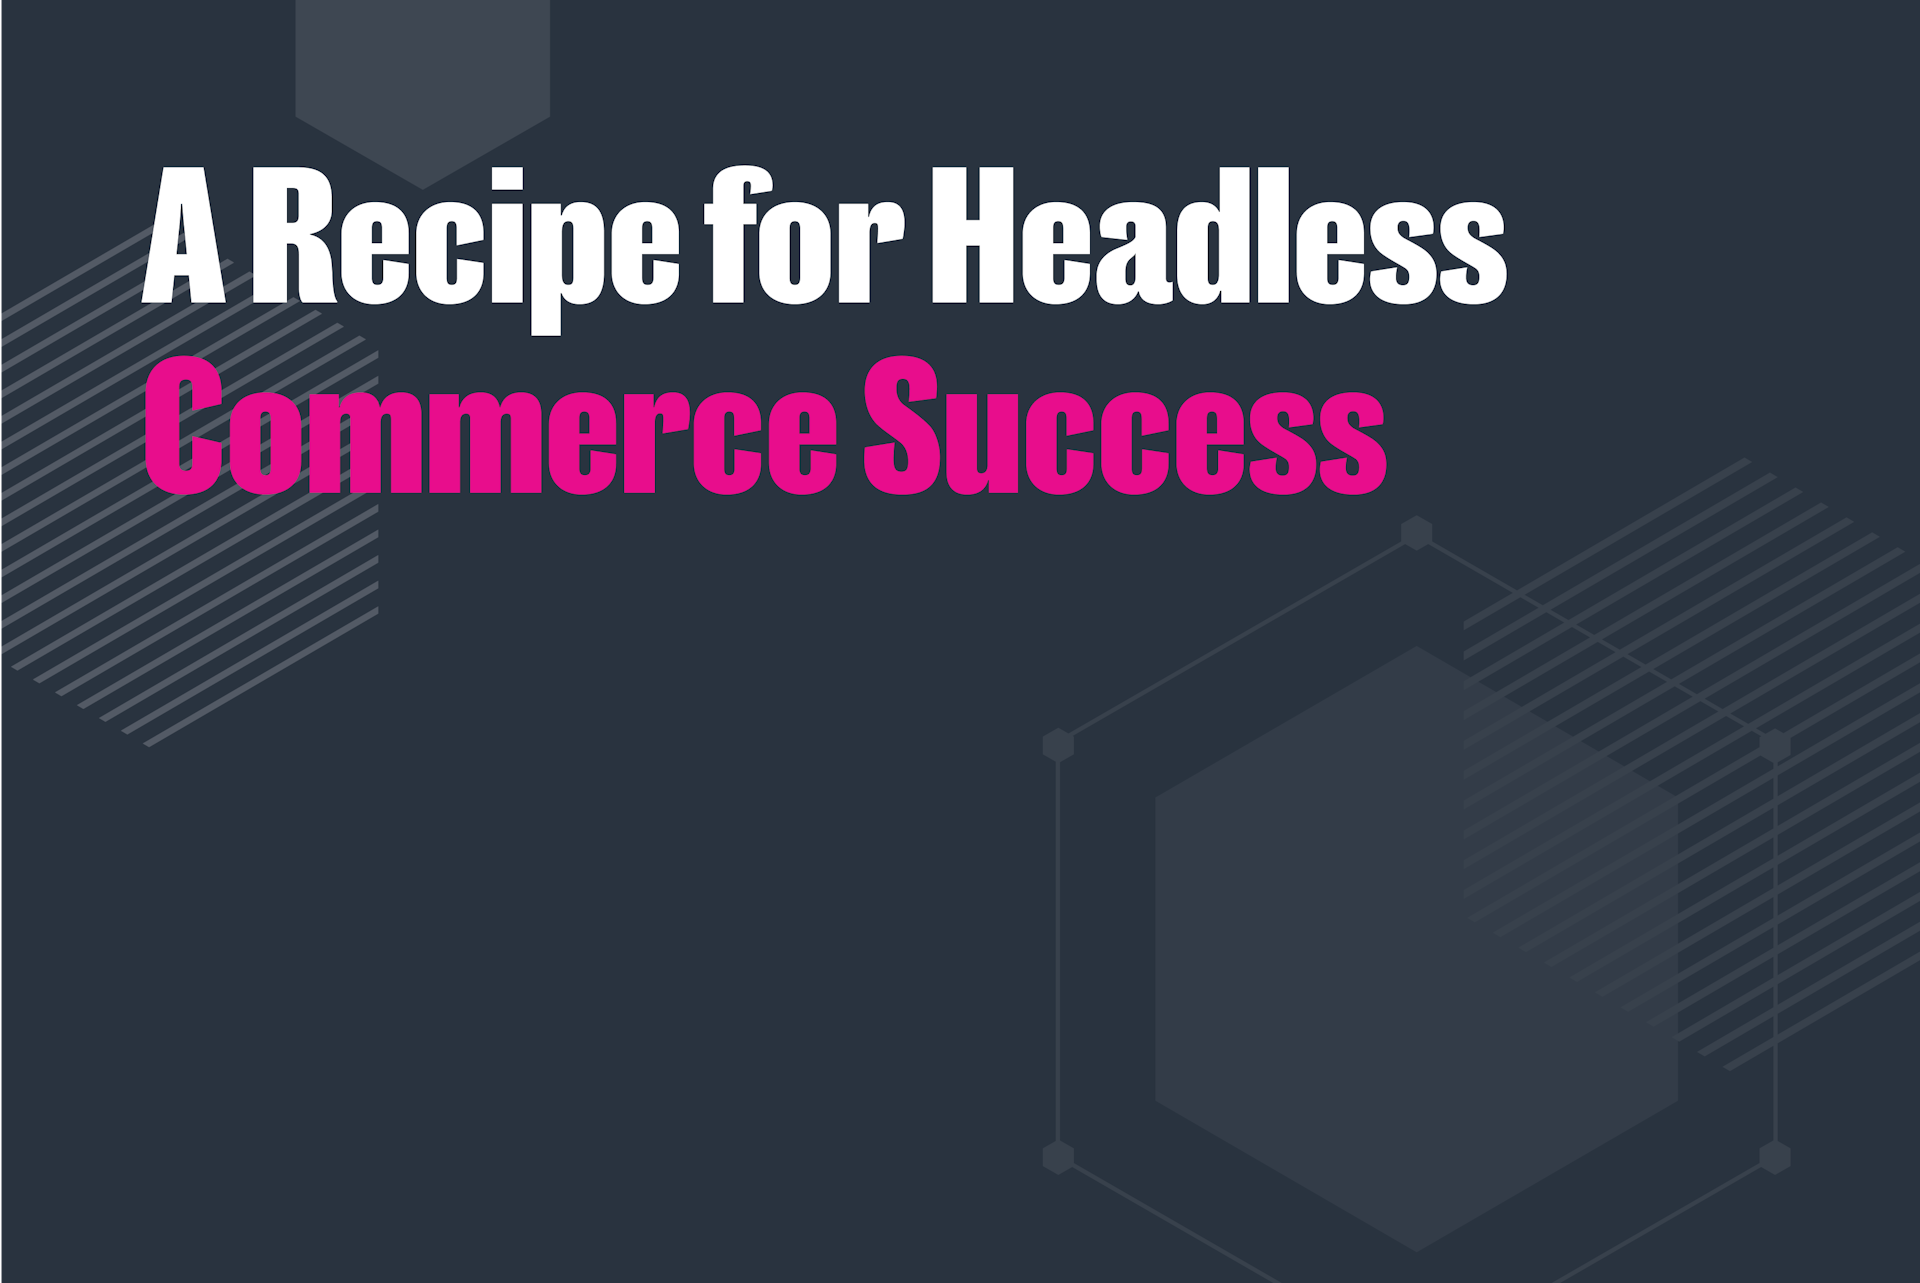 Headless Commerce Webinar with Traeger Grills